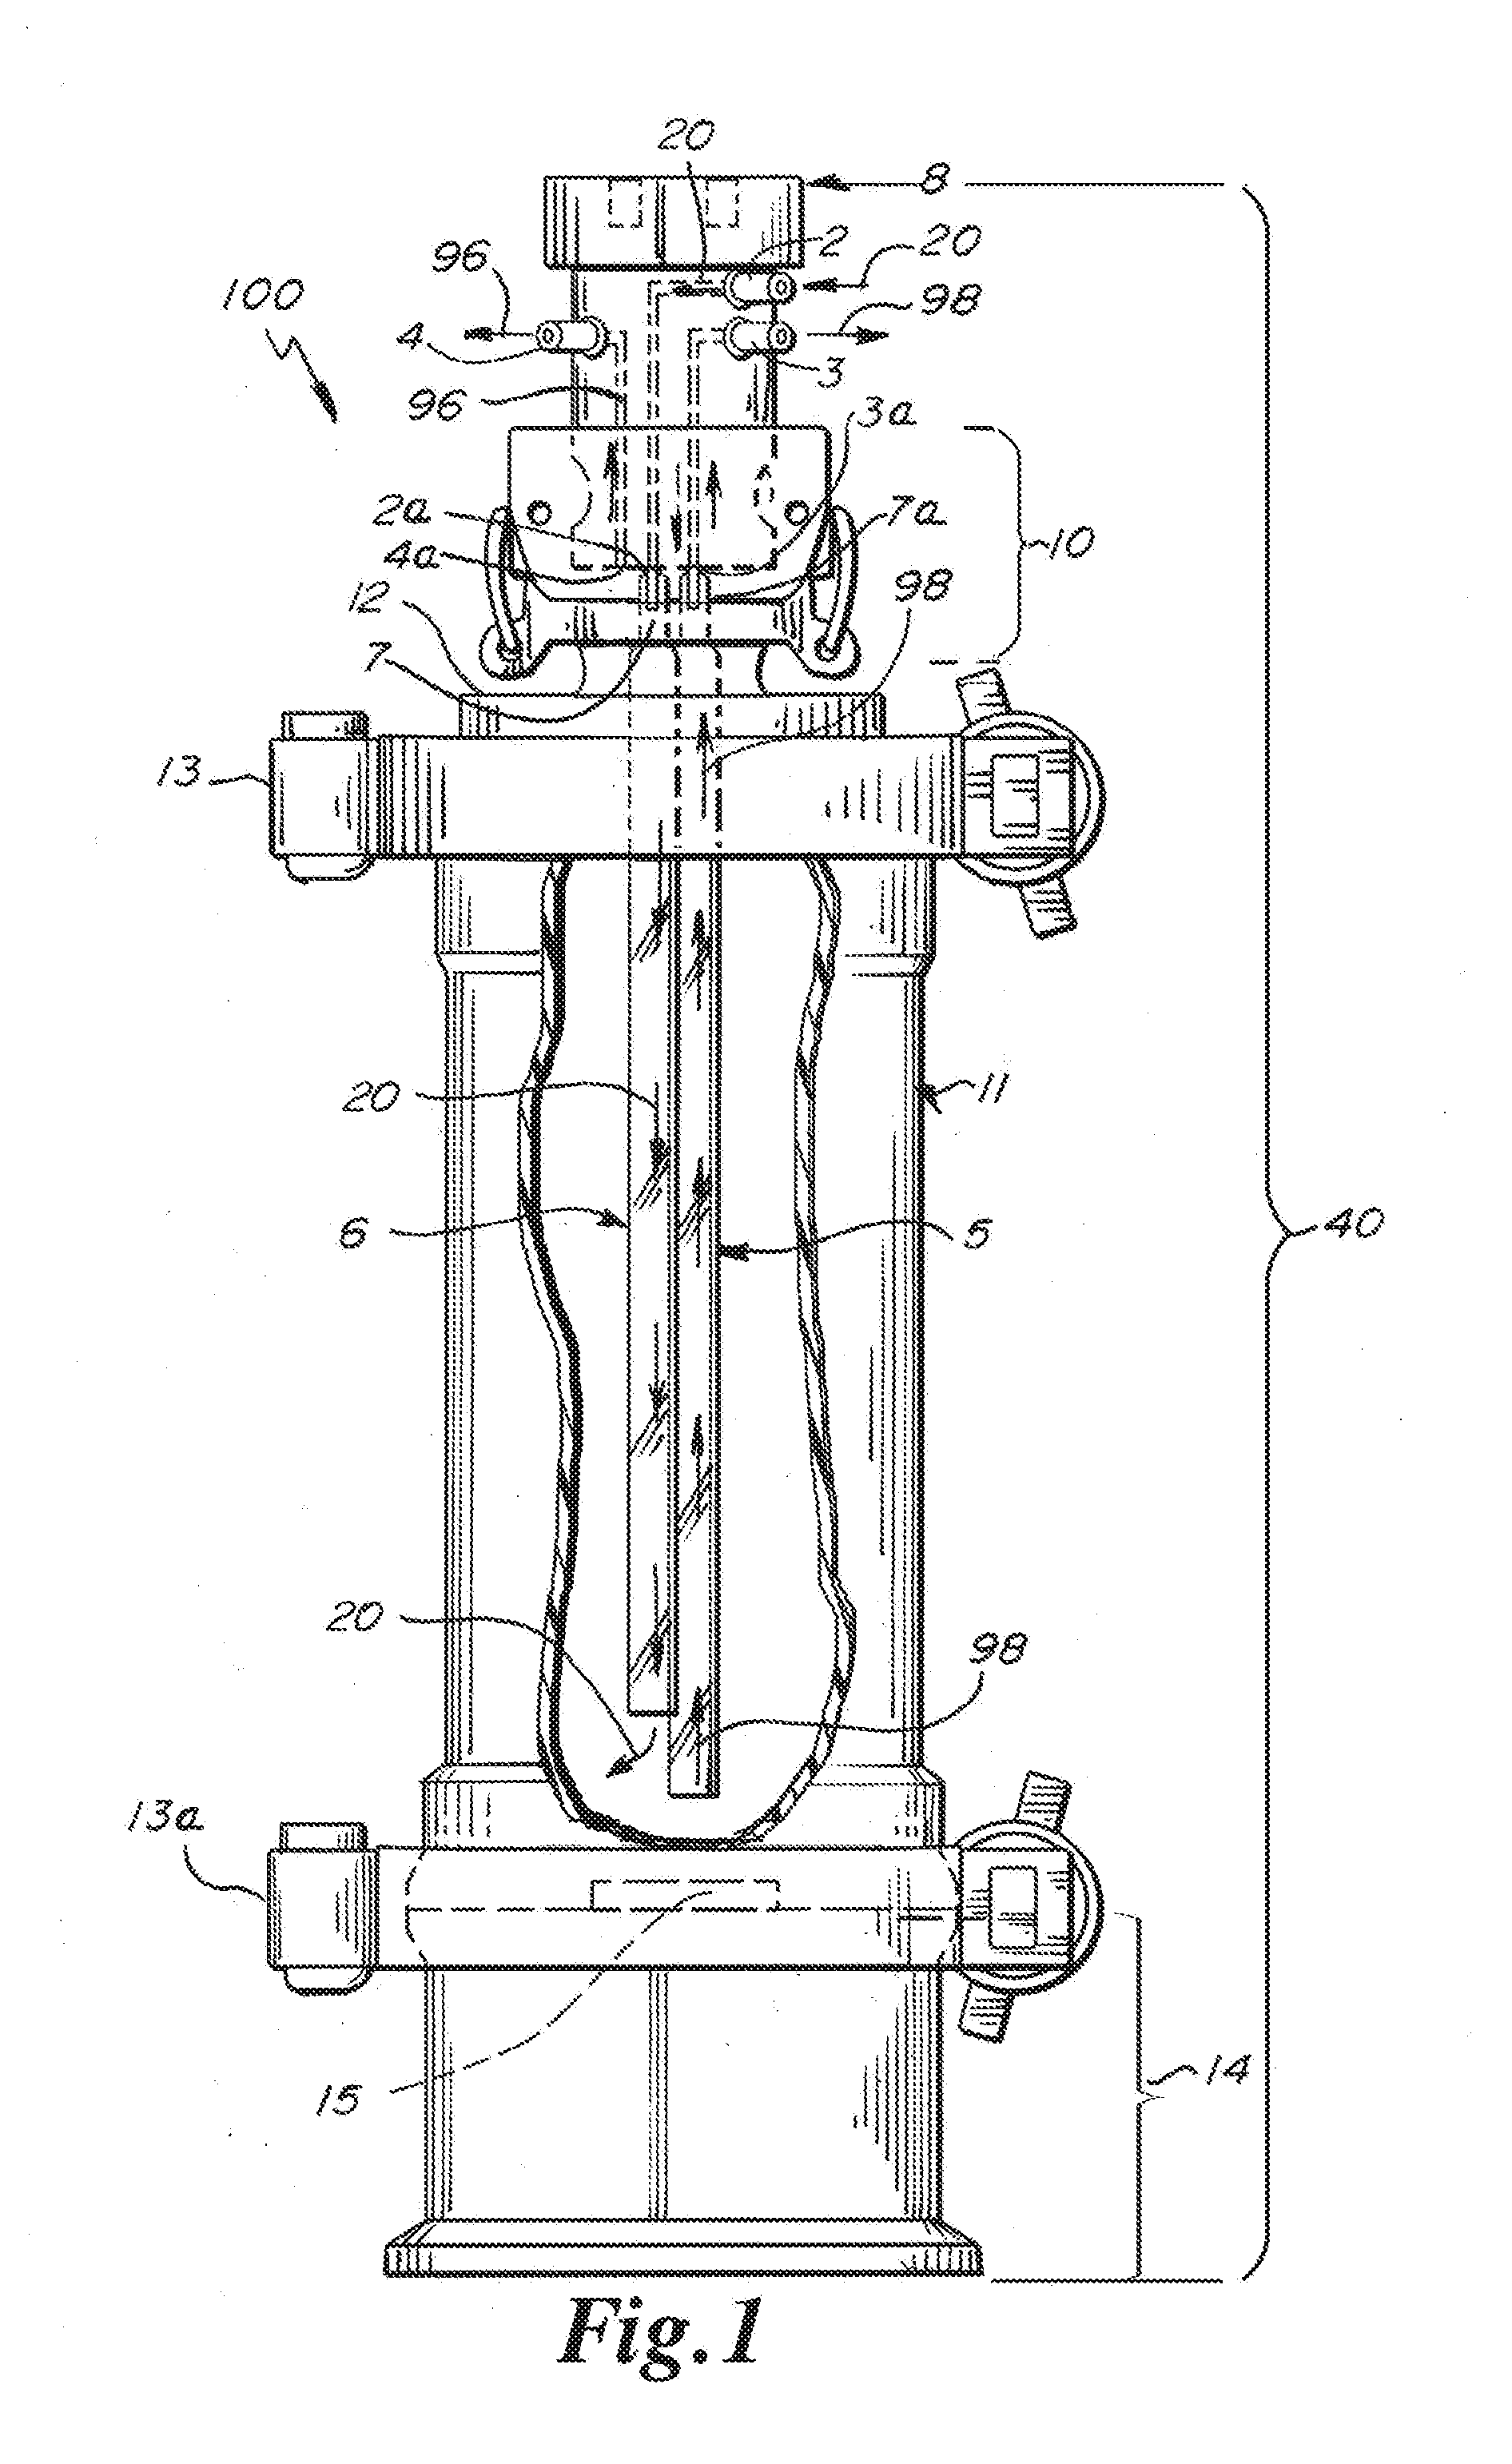 Device and system to improve asepsis in dental apparatus